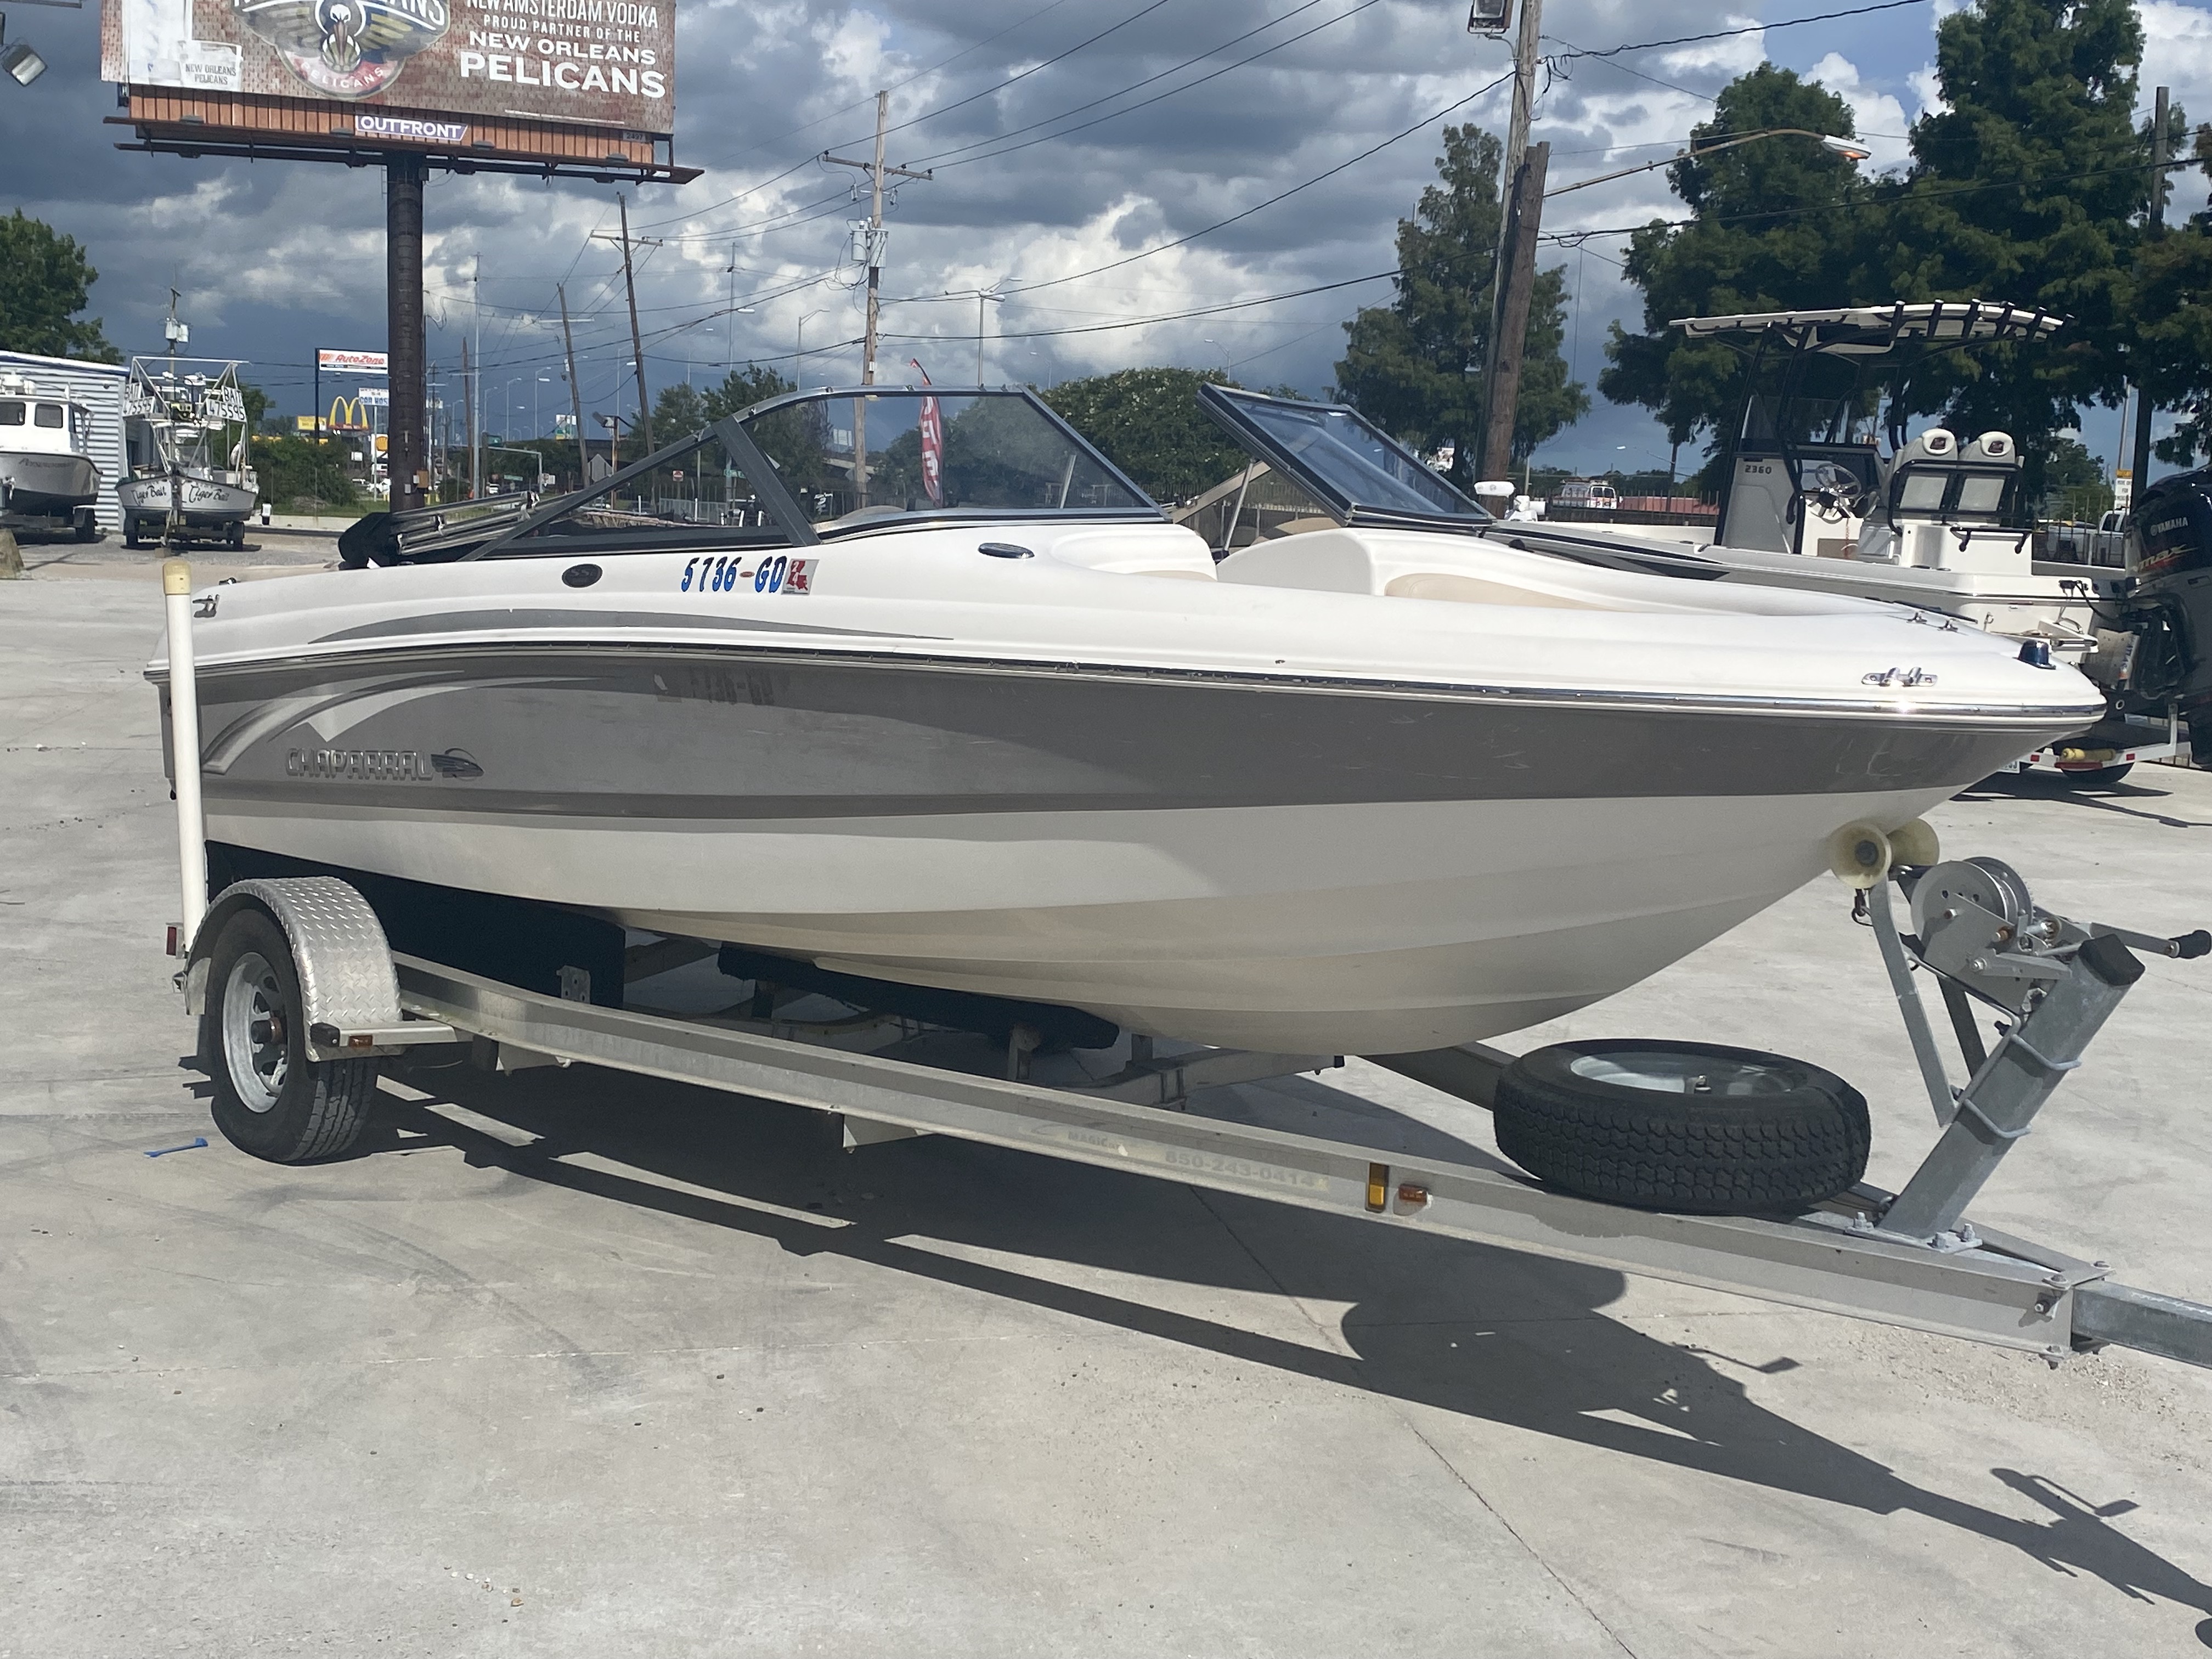 2008 Chaparral boat for sale, model of the boat is 180 SSi & Image # 2 of 10